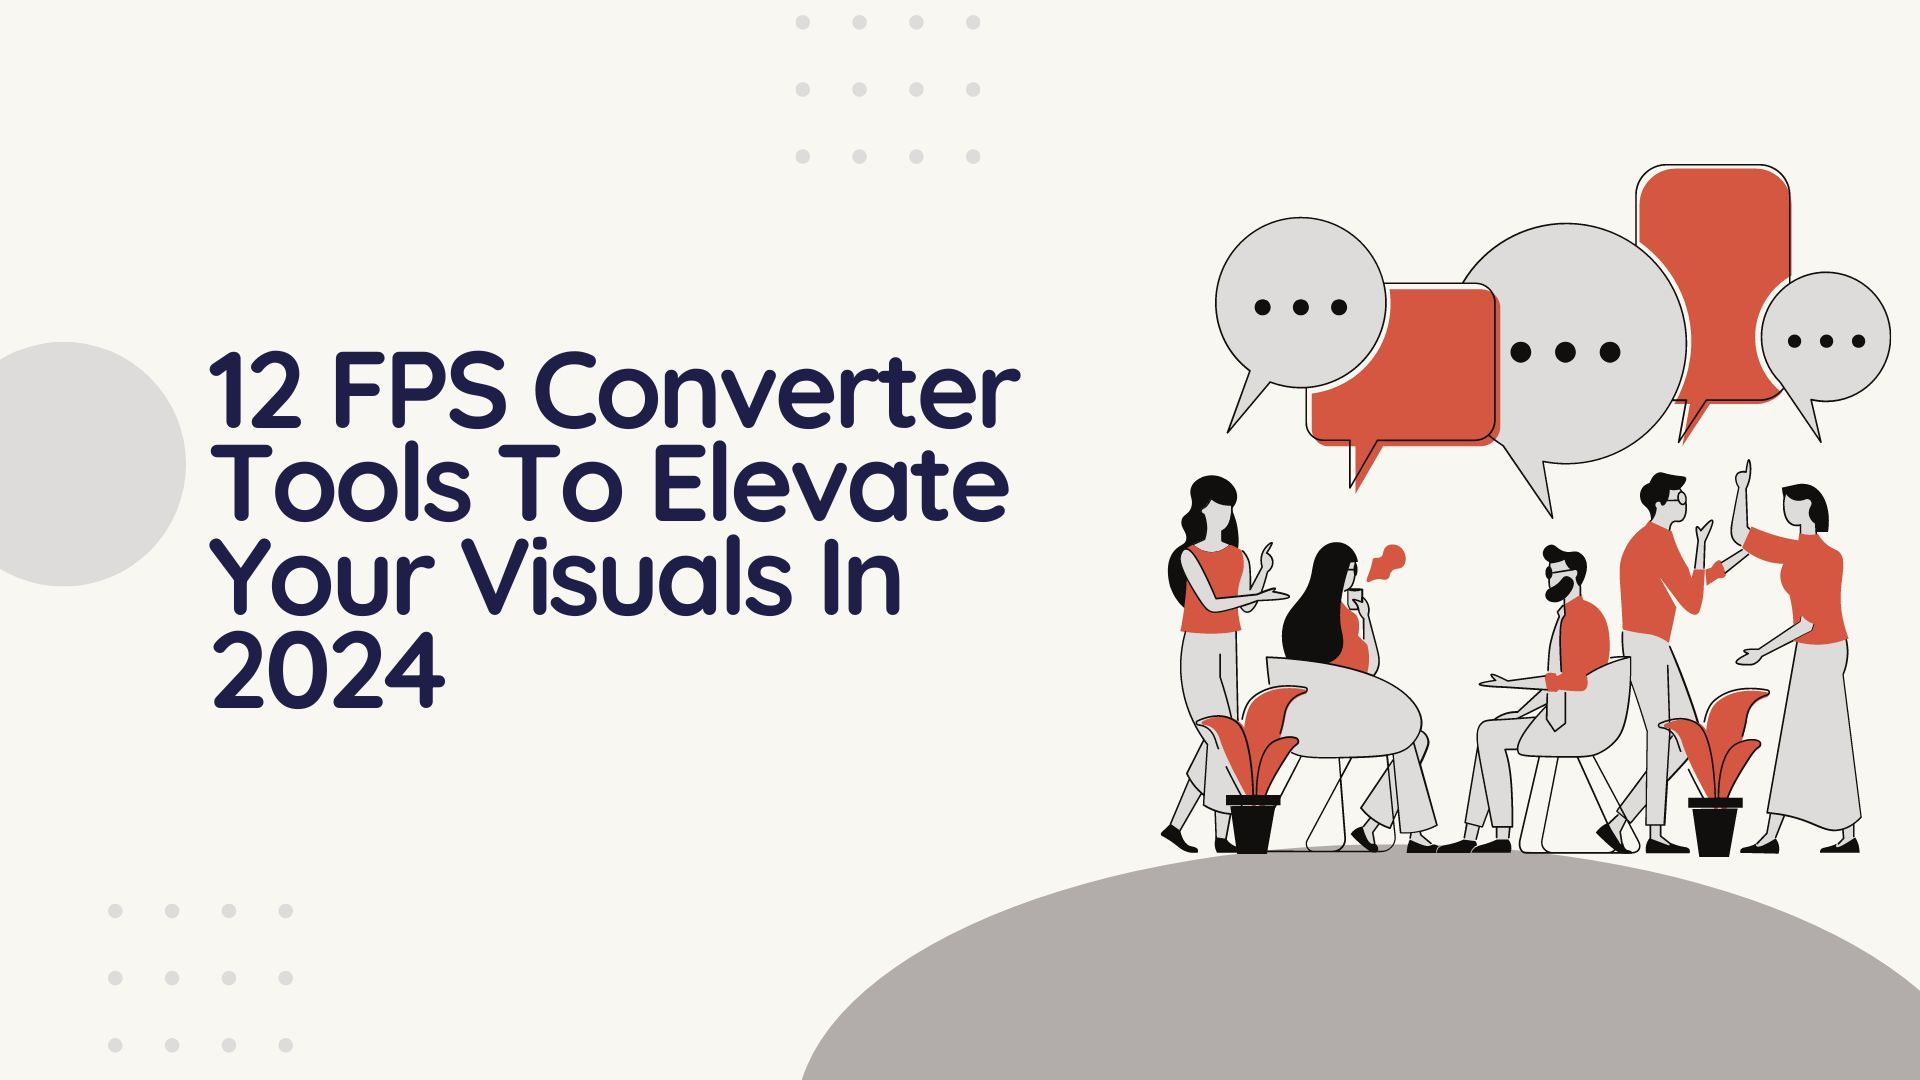 12 FPS Converter Tools To Elevate Your Visuals In 2024